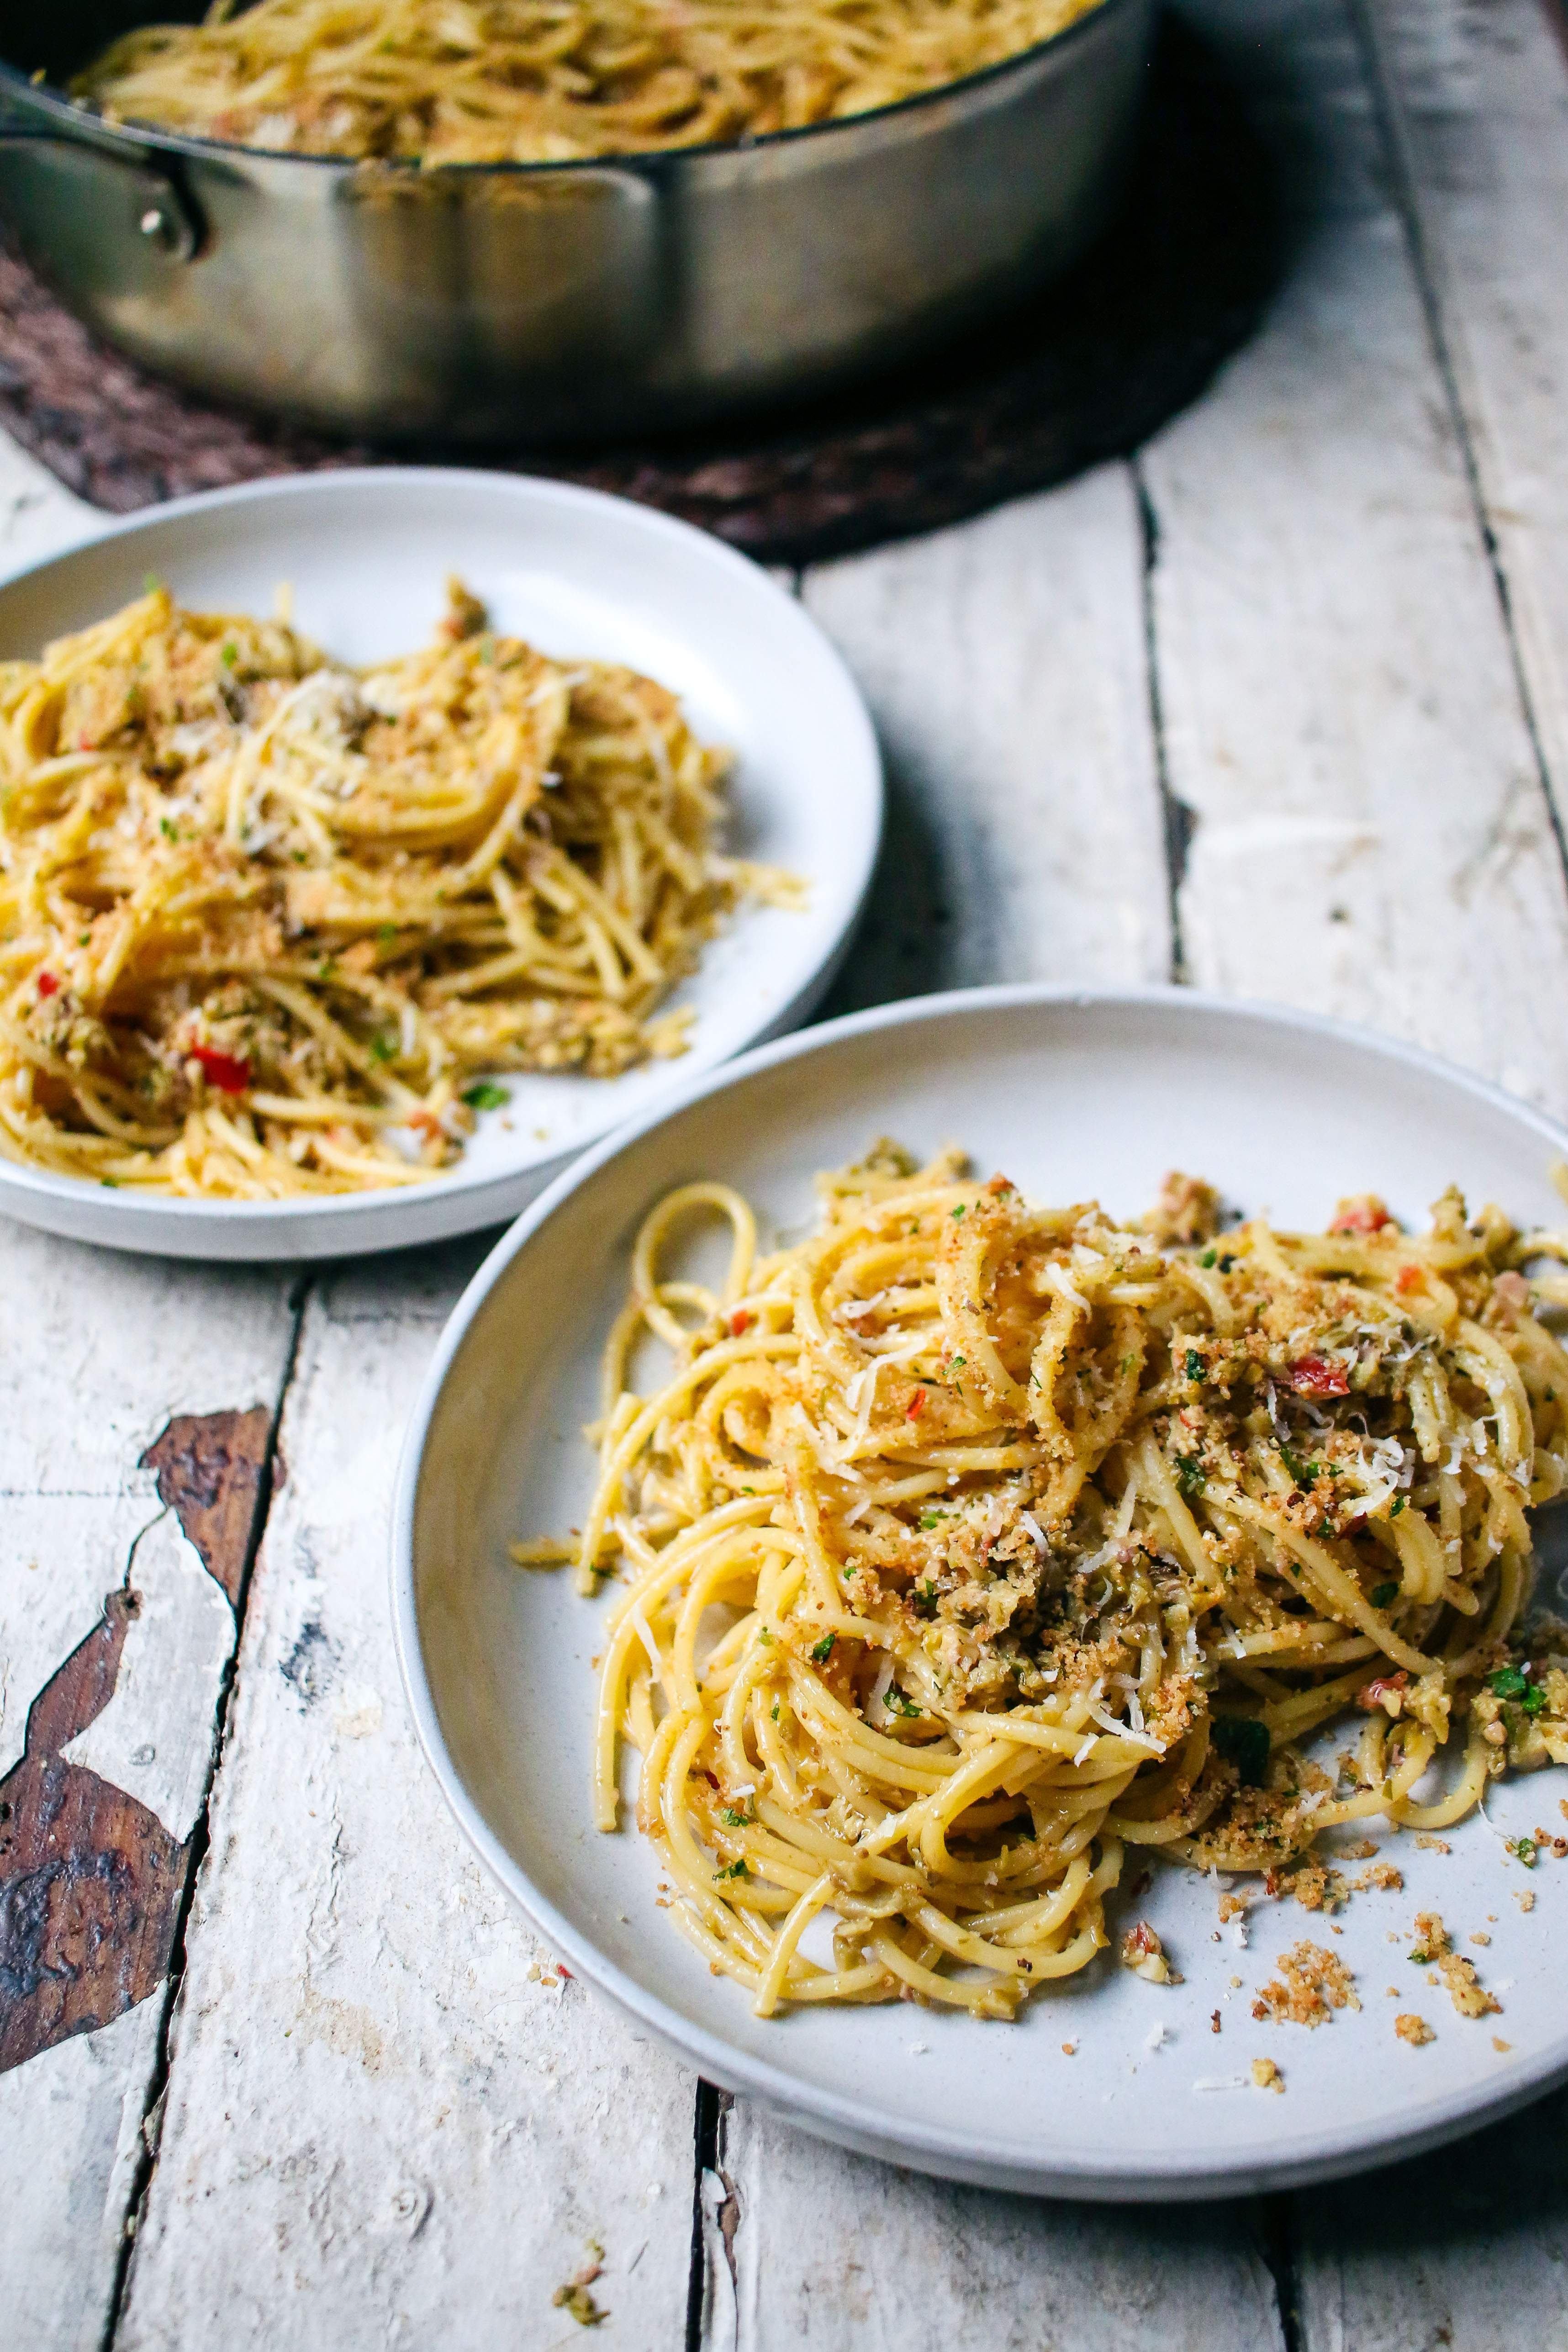 Olive Tapenade Spaghetti with Garlic Breadcrumbs| I Will Not Eat Oysters